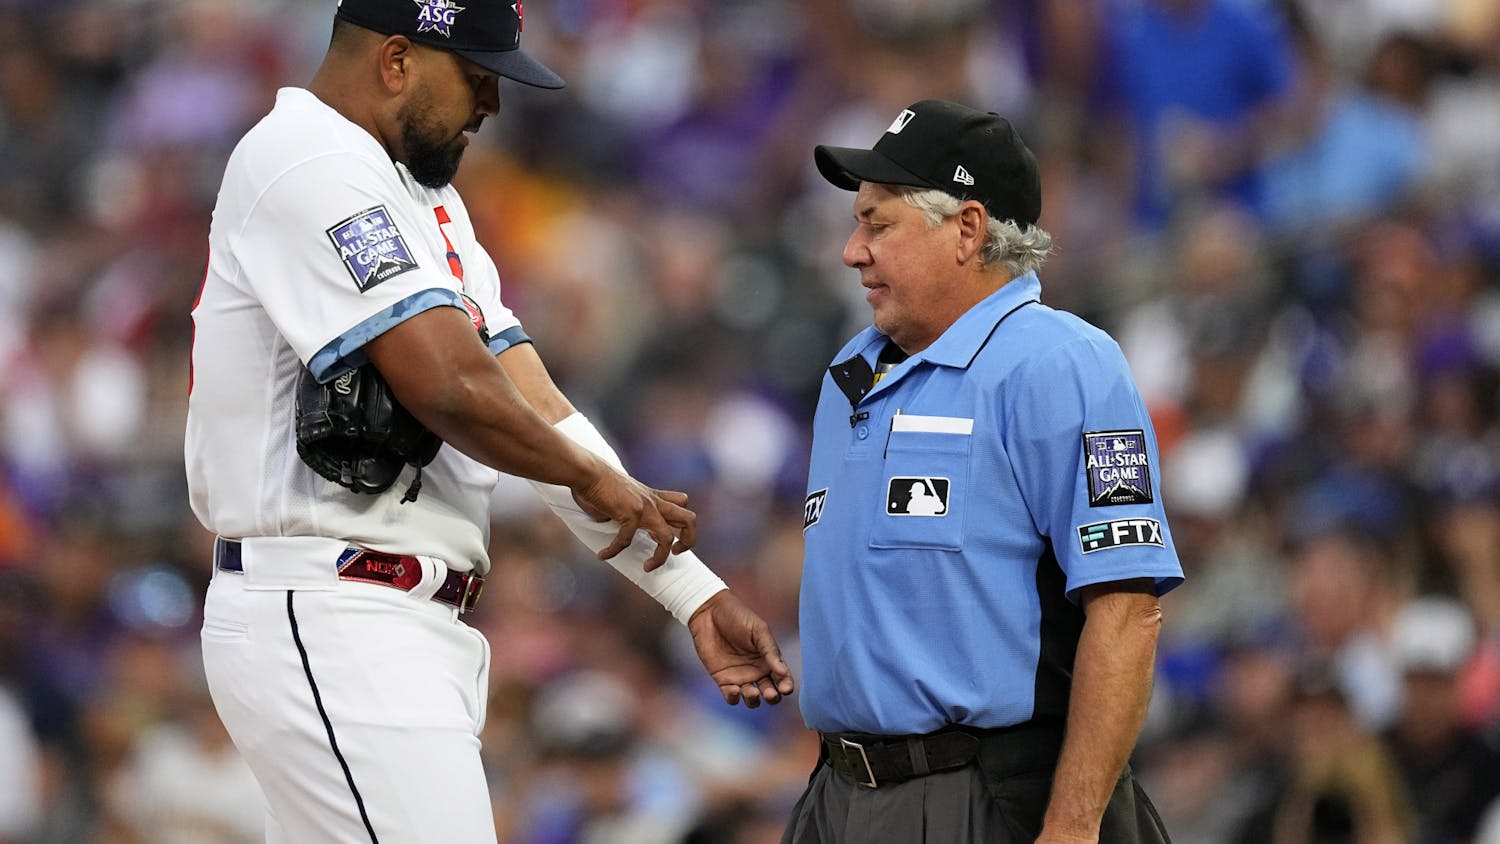 Home plate umpire Tom Hallion, right, checks for foreign substances on National League's German Marquez, of the Colorado Rockies, during the fourth inning of the MLB All-Star baseball game, Tuesday, July 13, 2021, in Denver. (AP Photo/Jack Dempsey)